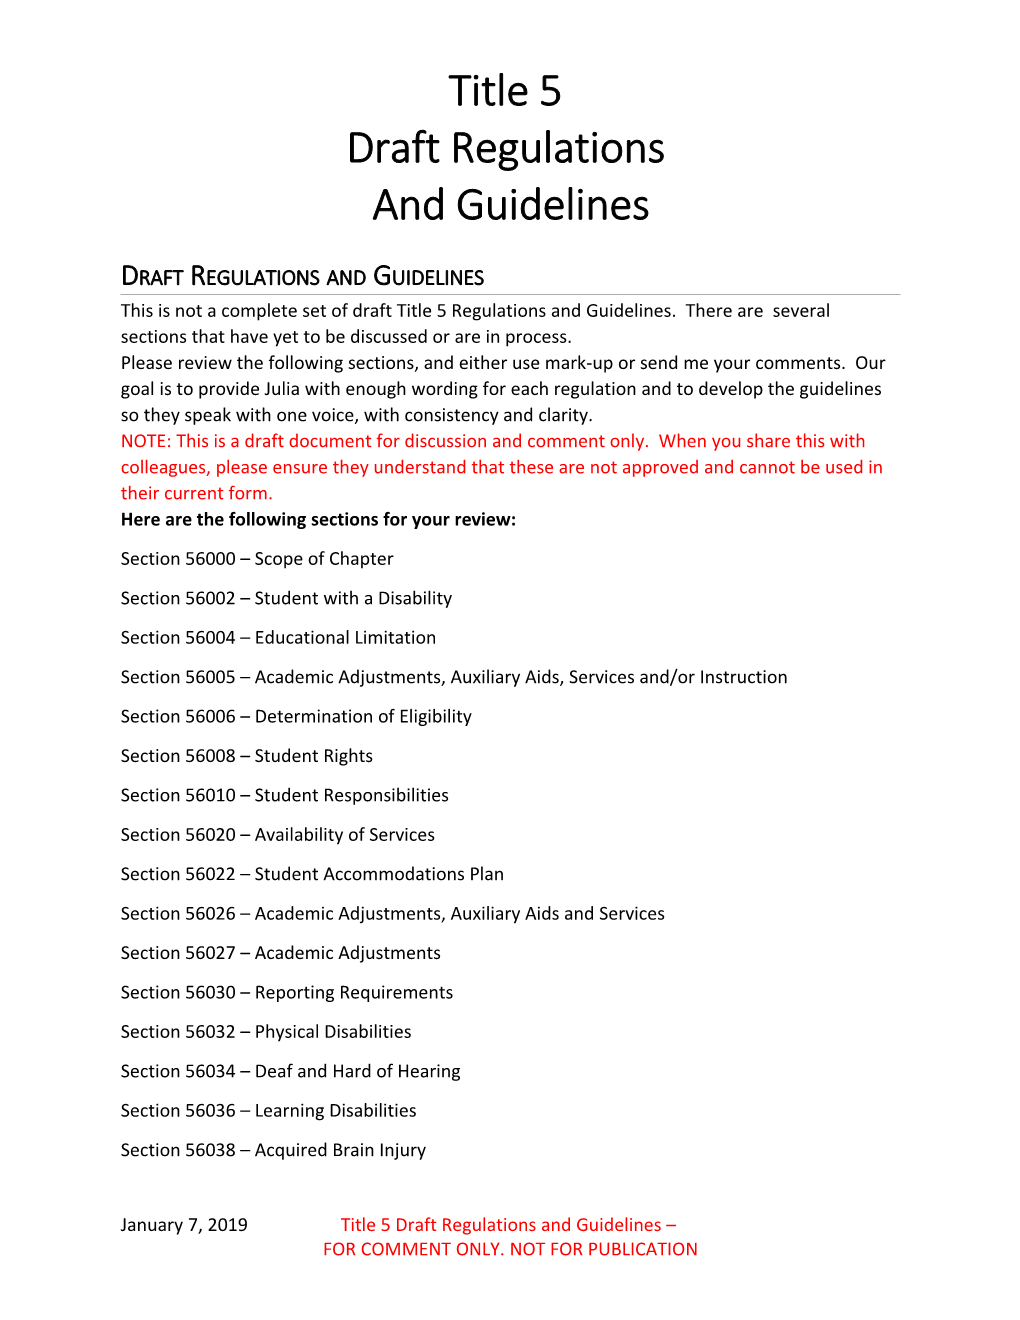 Draft Regulations and Guidelines